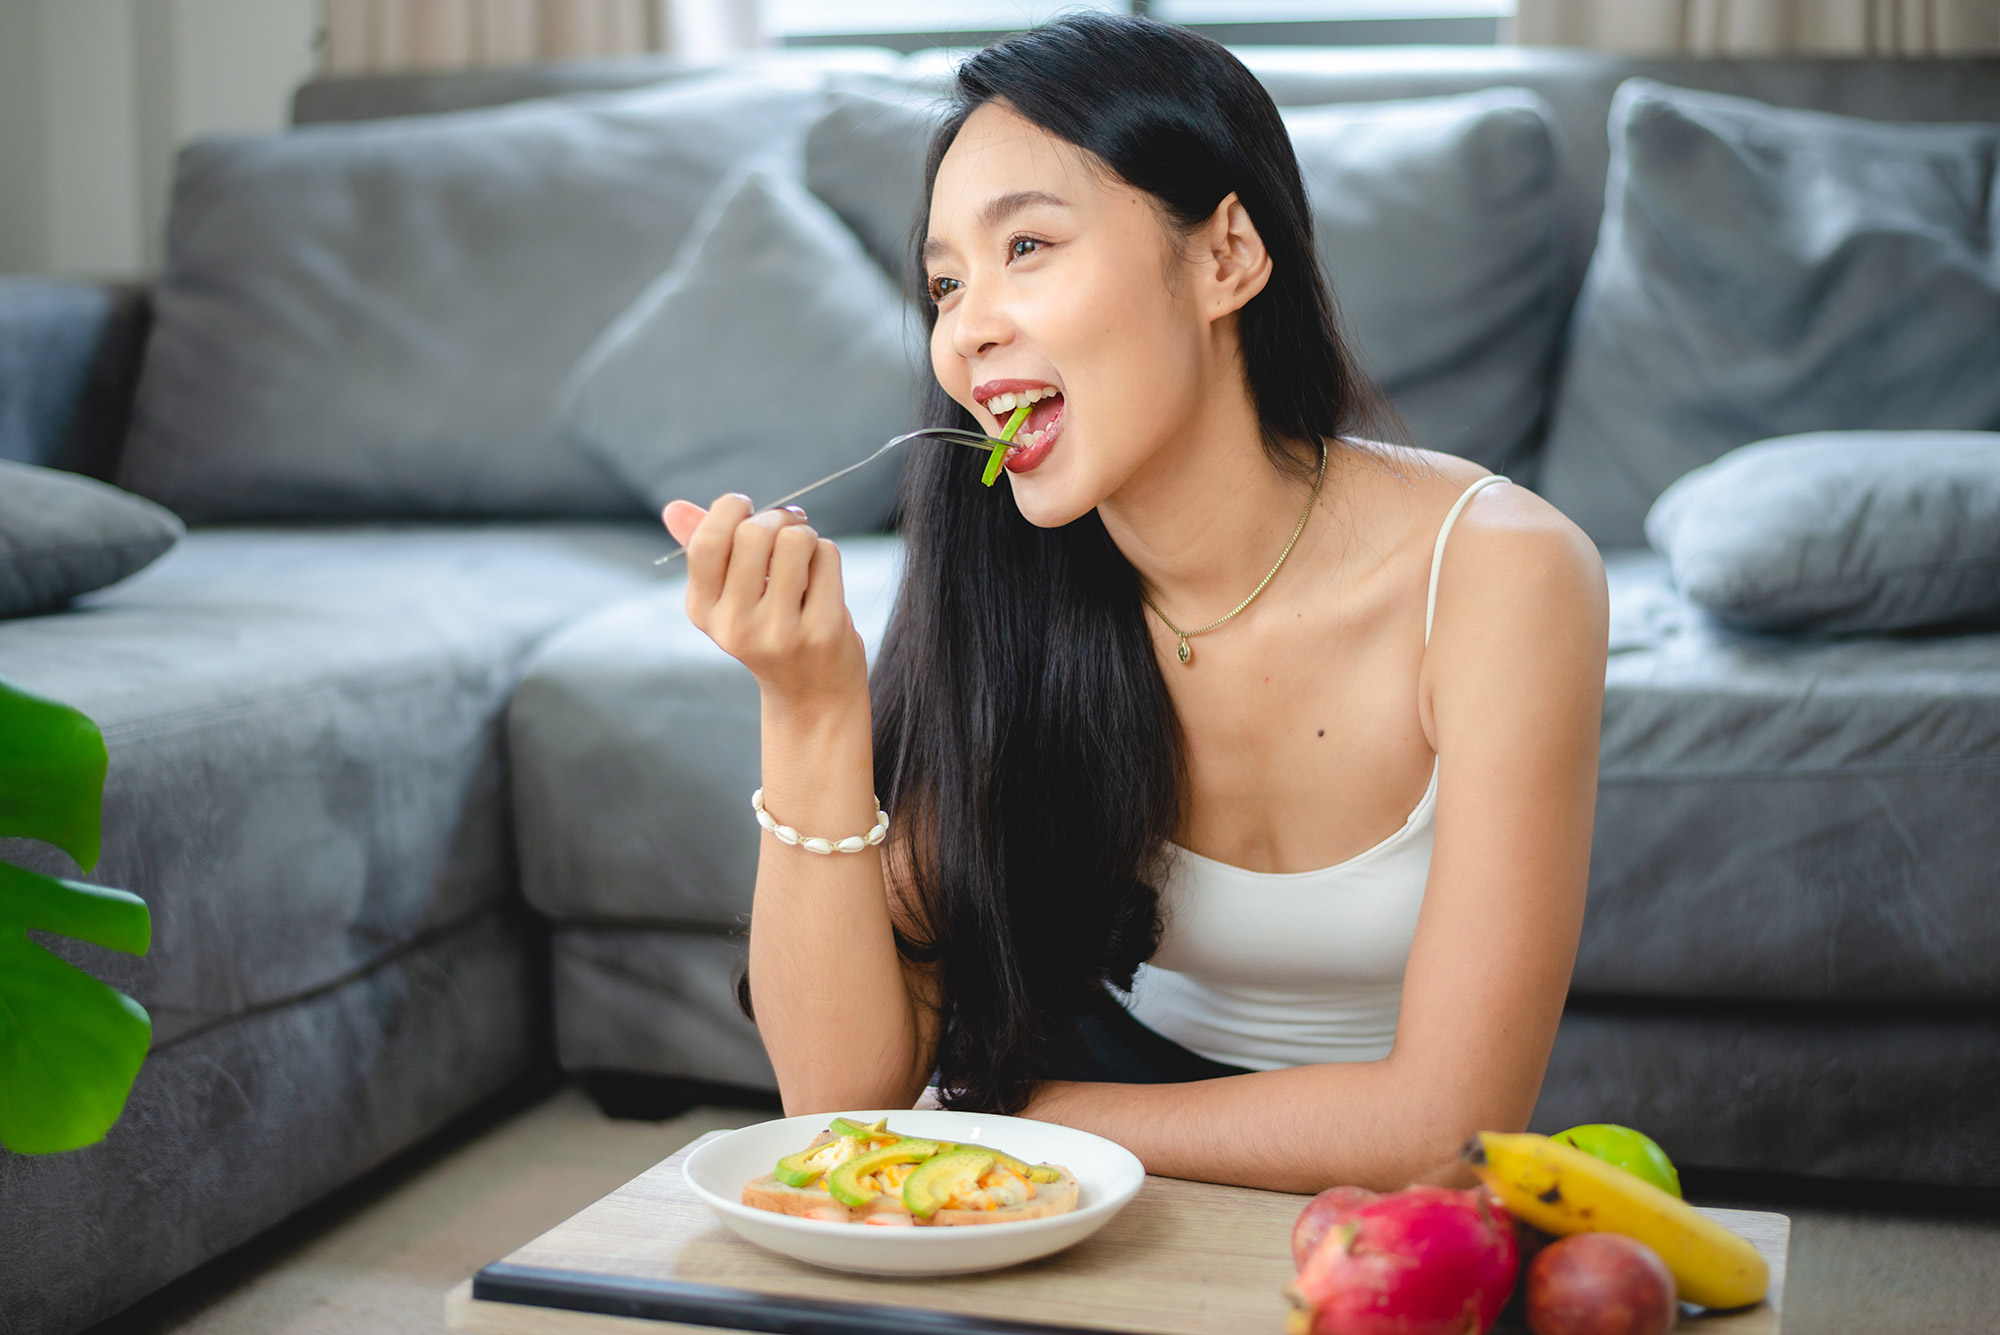 6 Tips for Those Who Want to Make Healthy Eating a Lifestyle